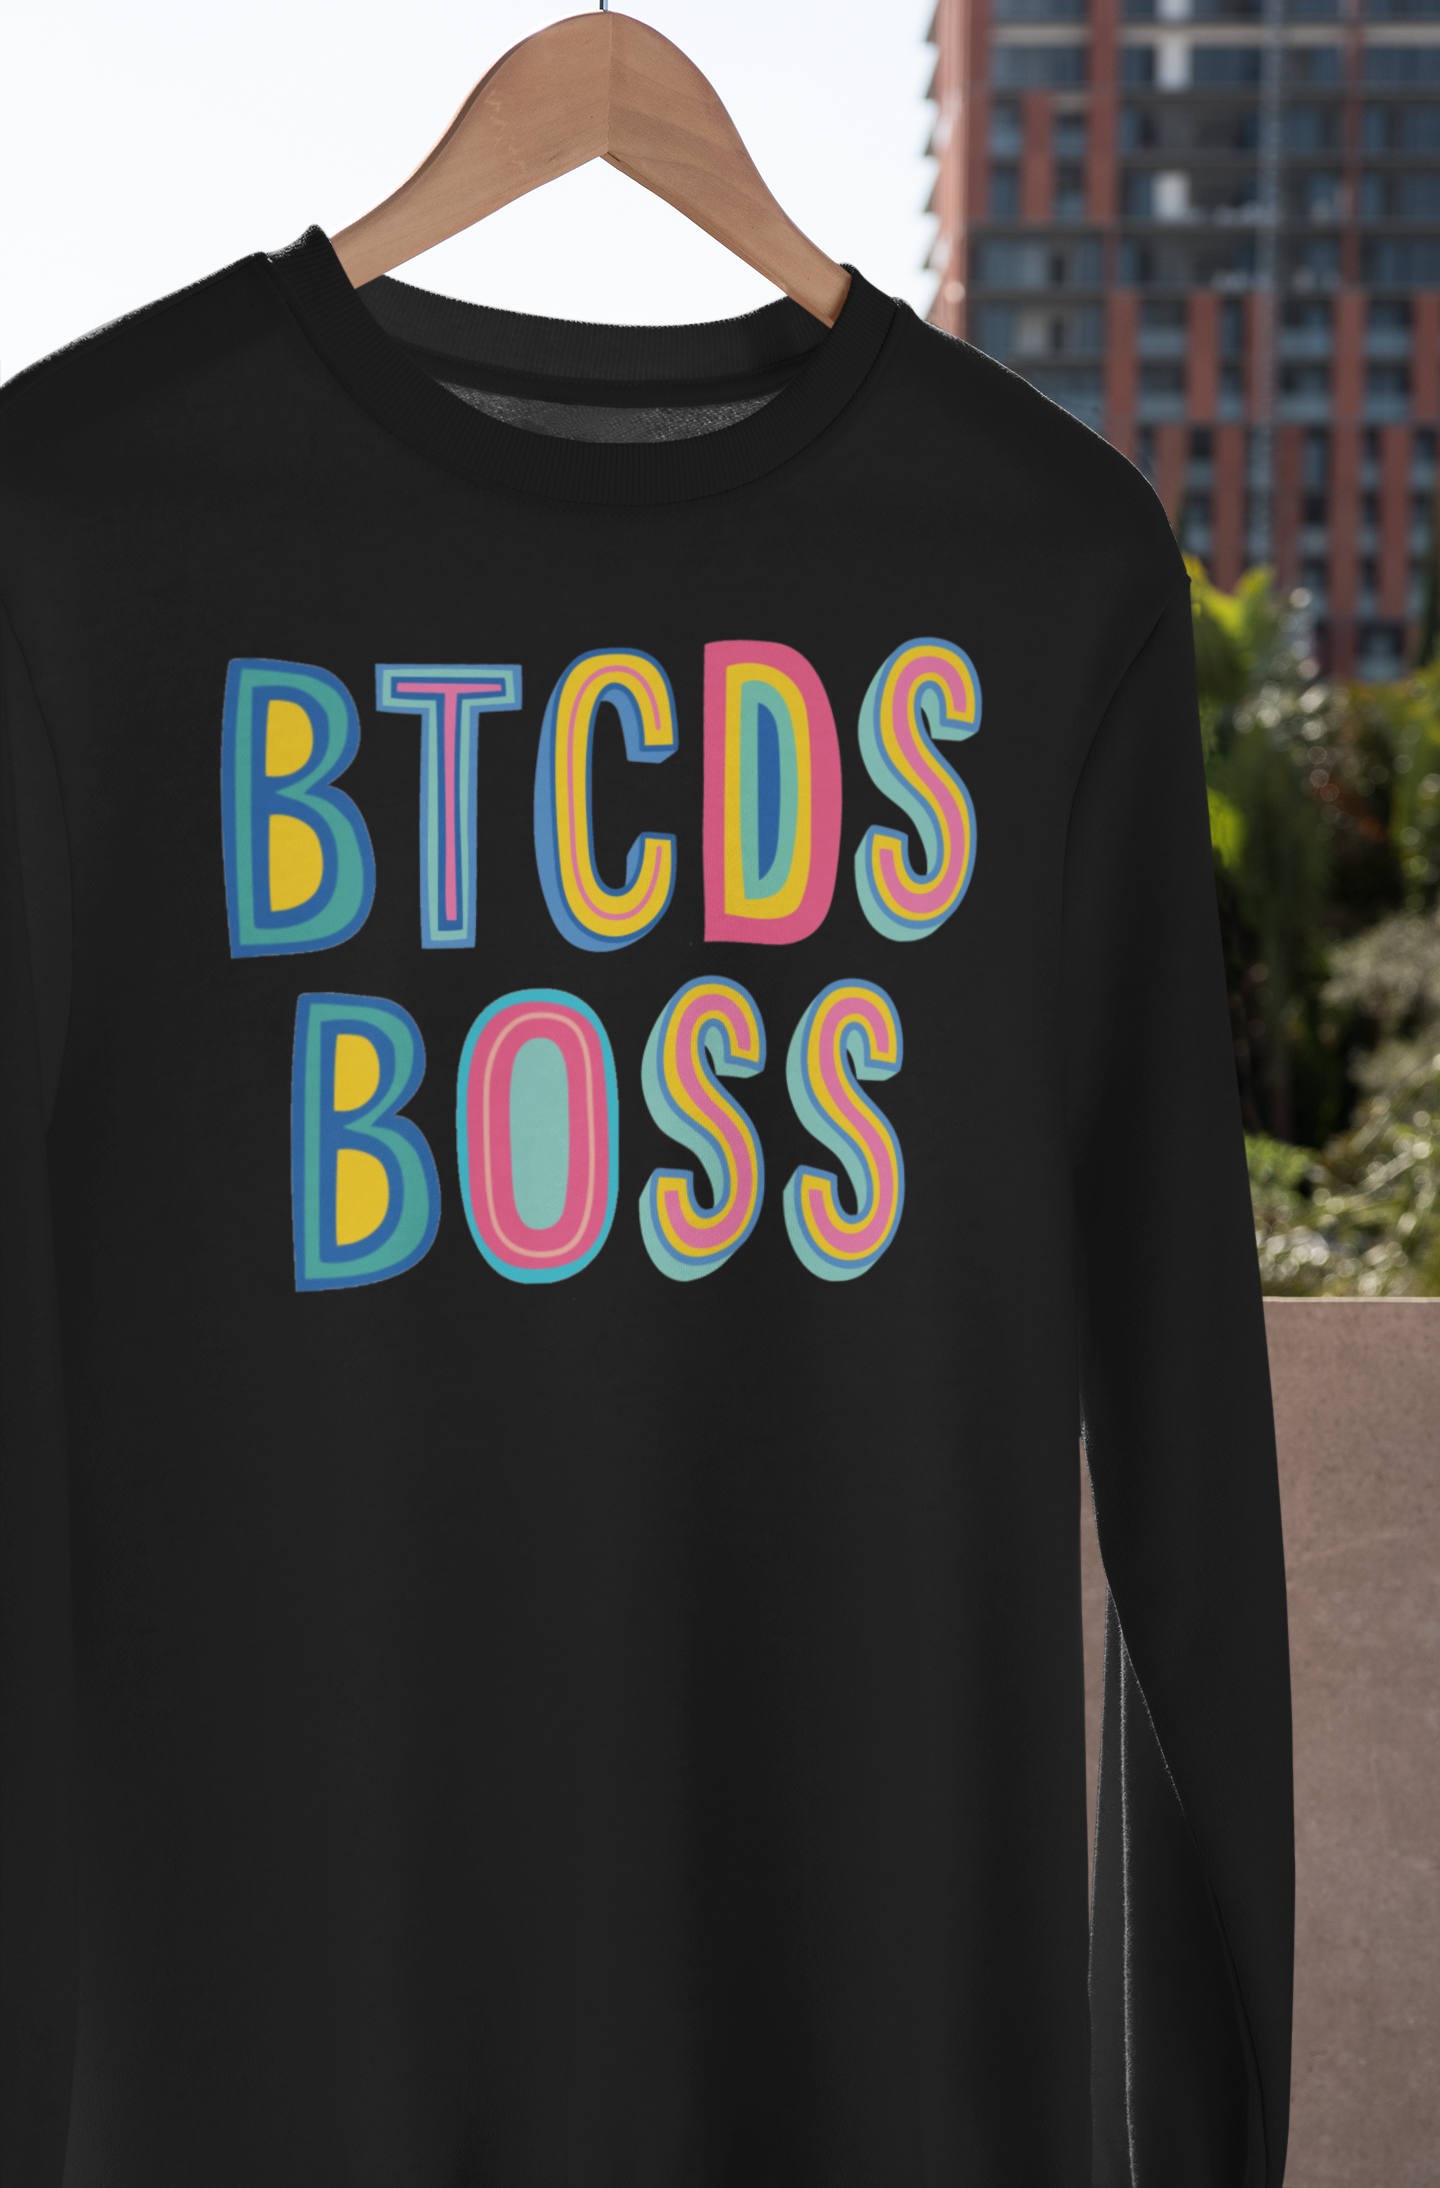 BTCDS Boss Colorful Graphic Tee